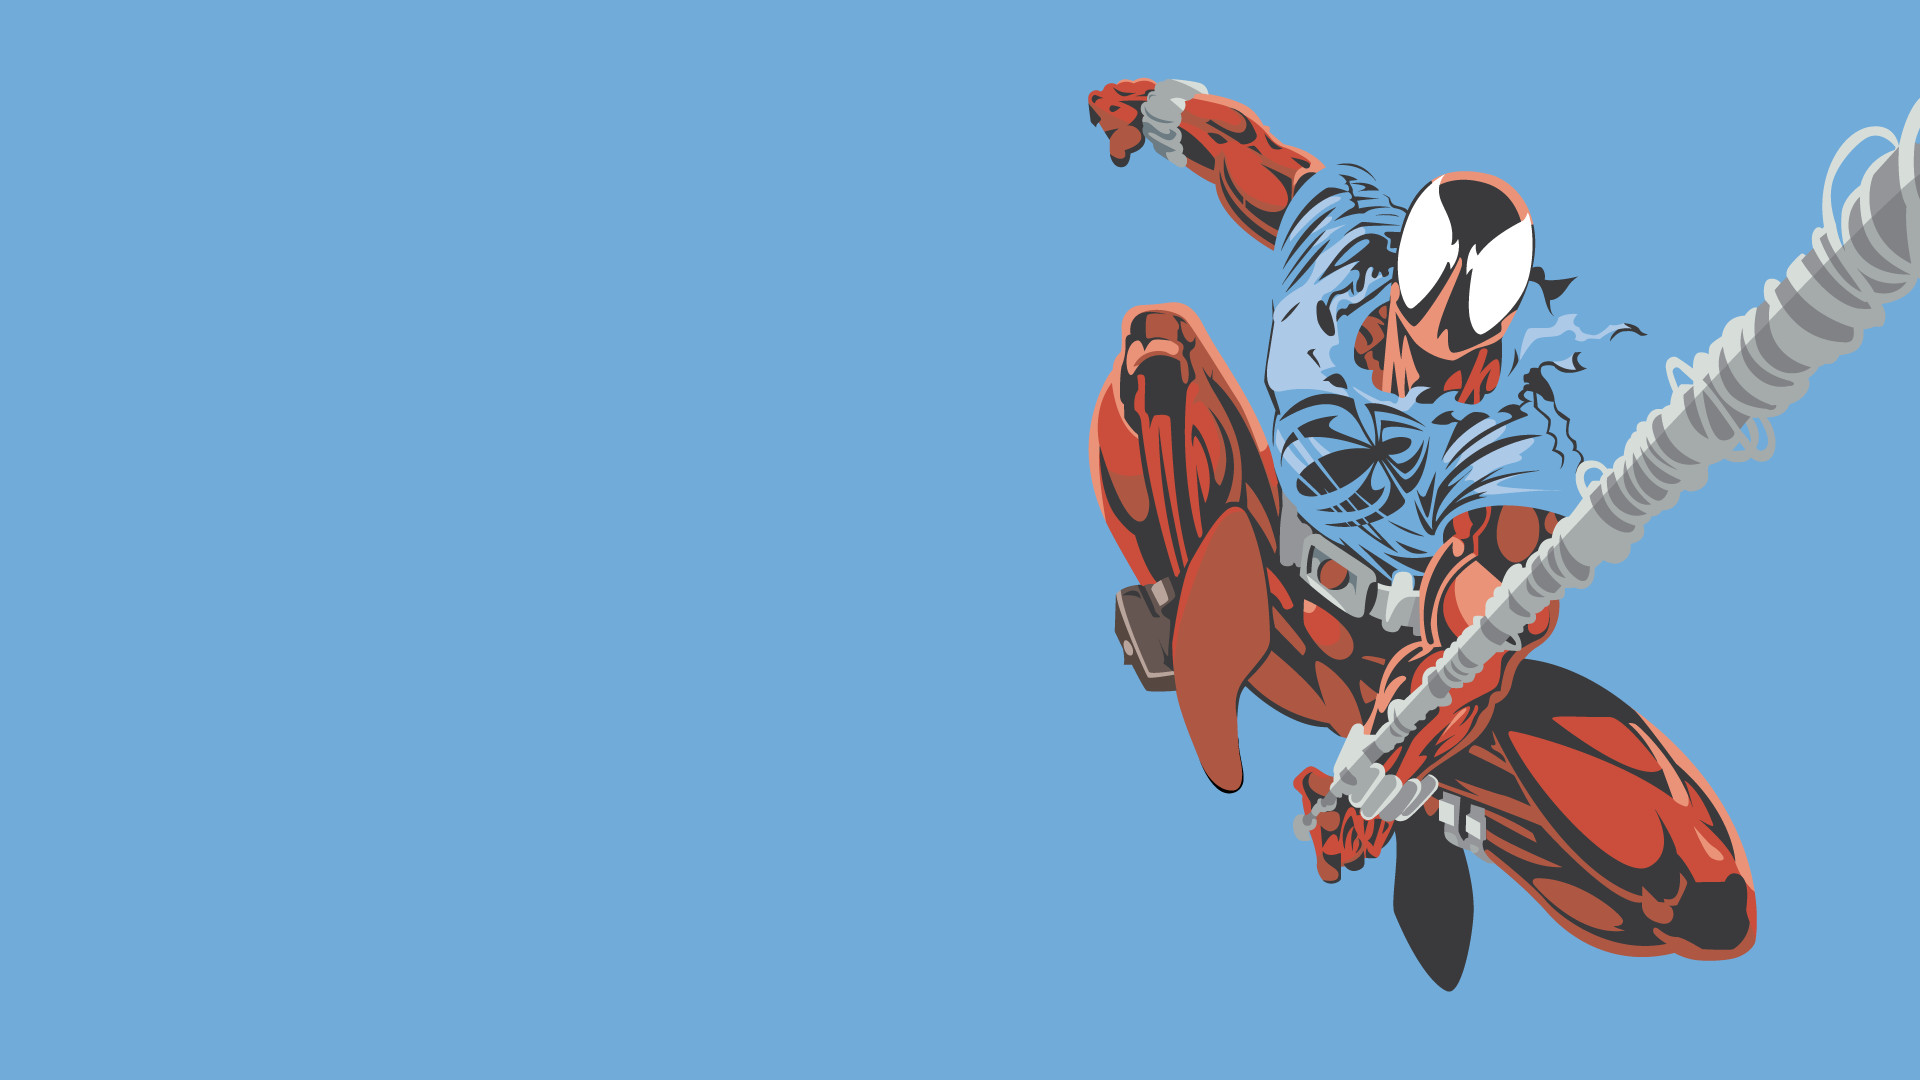 Got some love from my other Spider Man wallpapers, and was requested to do Scarlet Spider